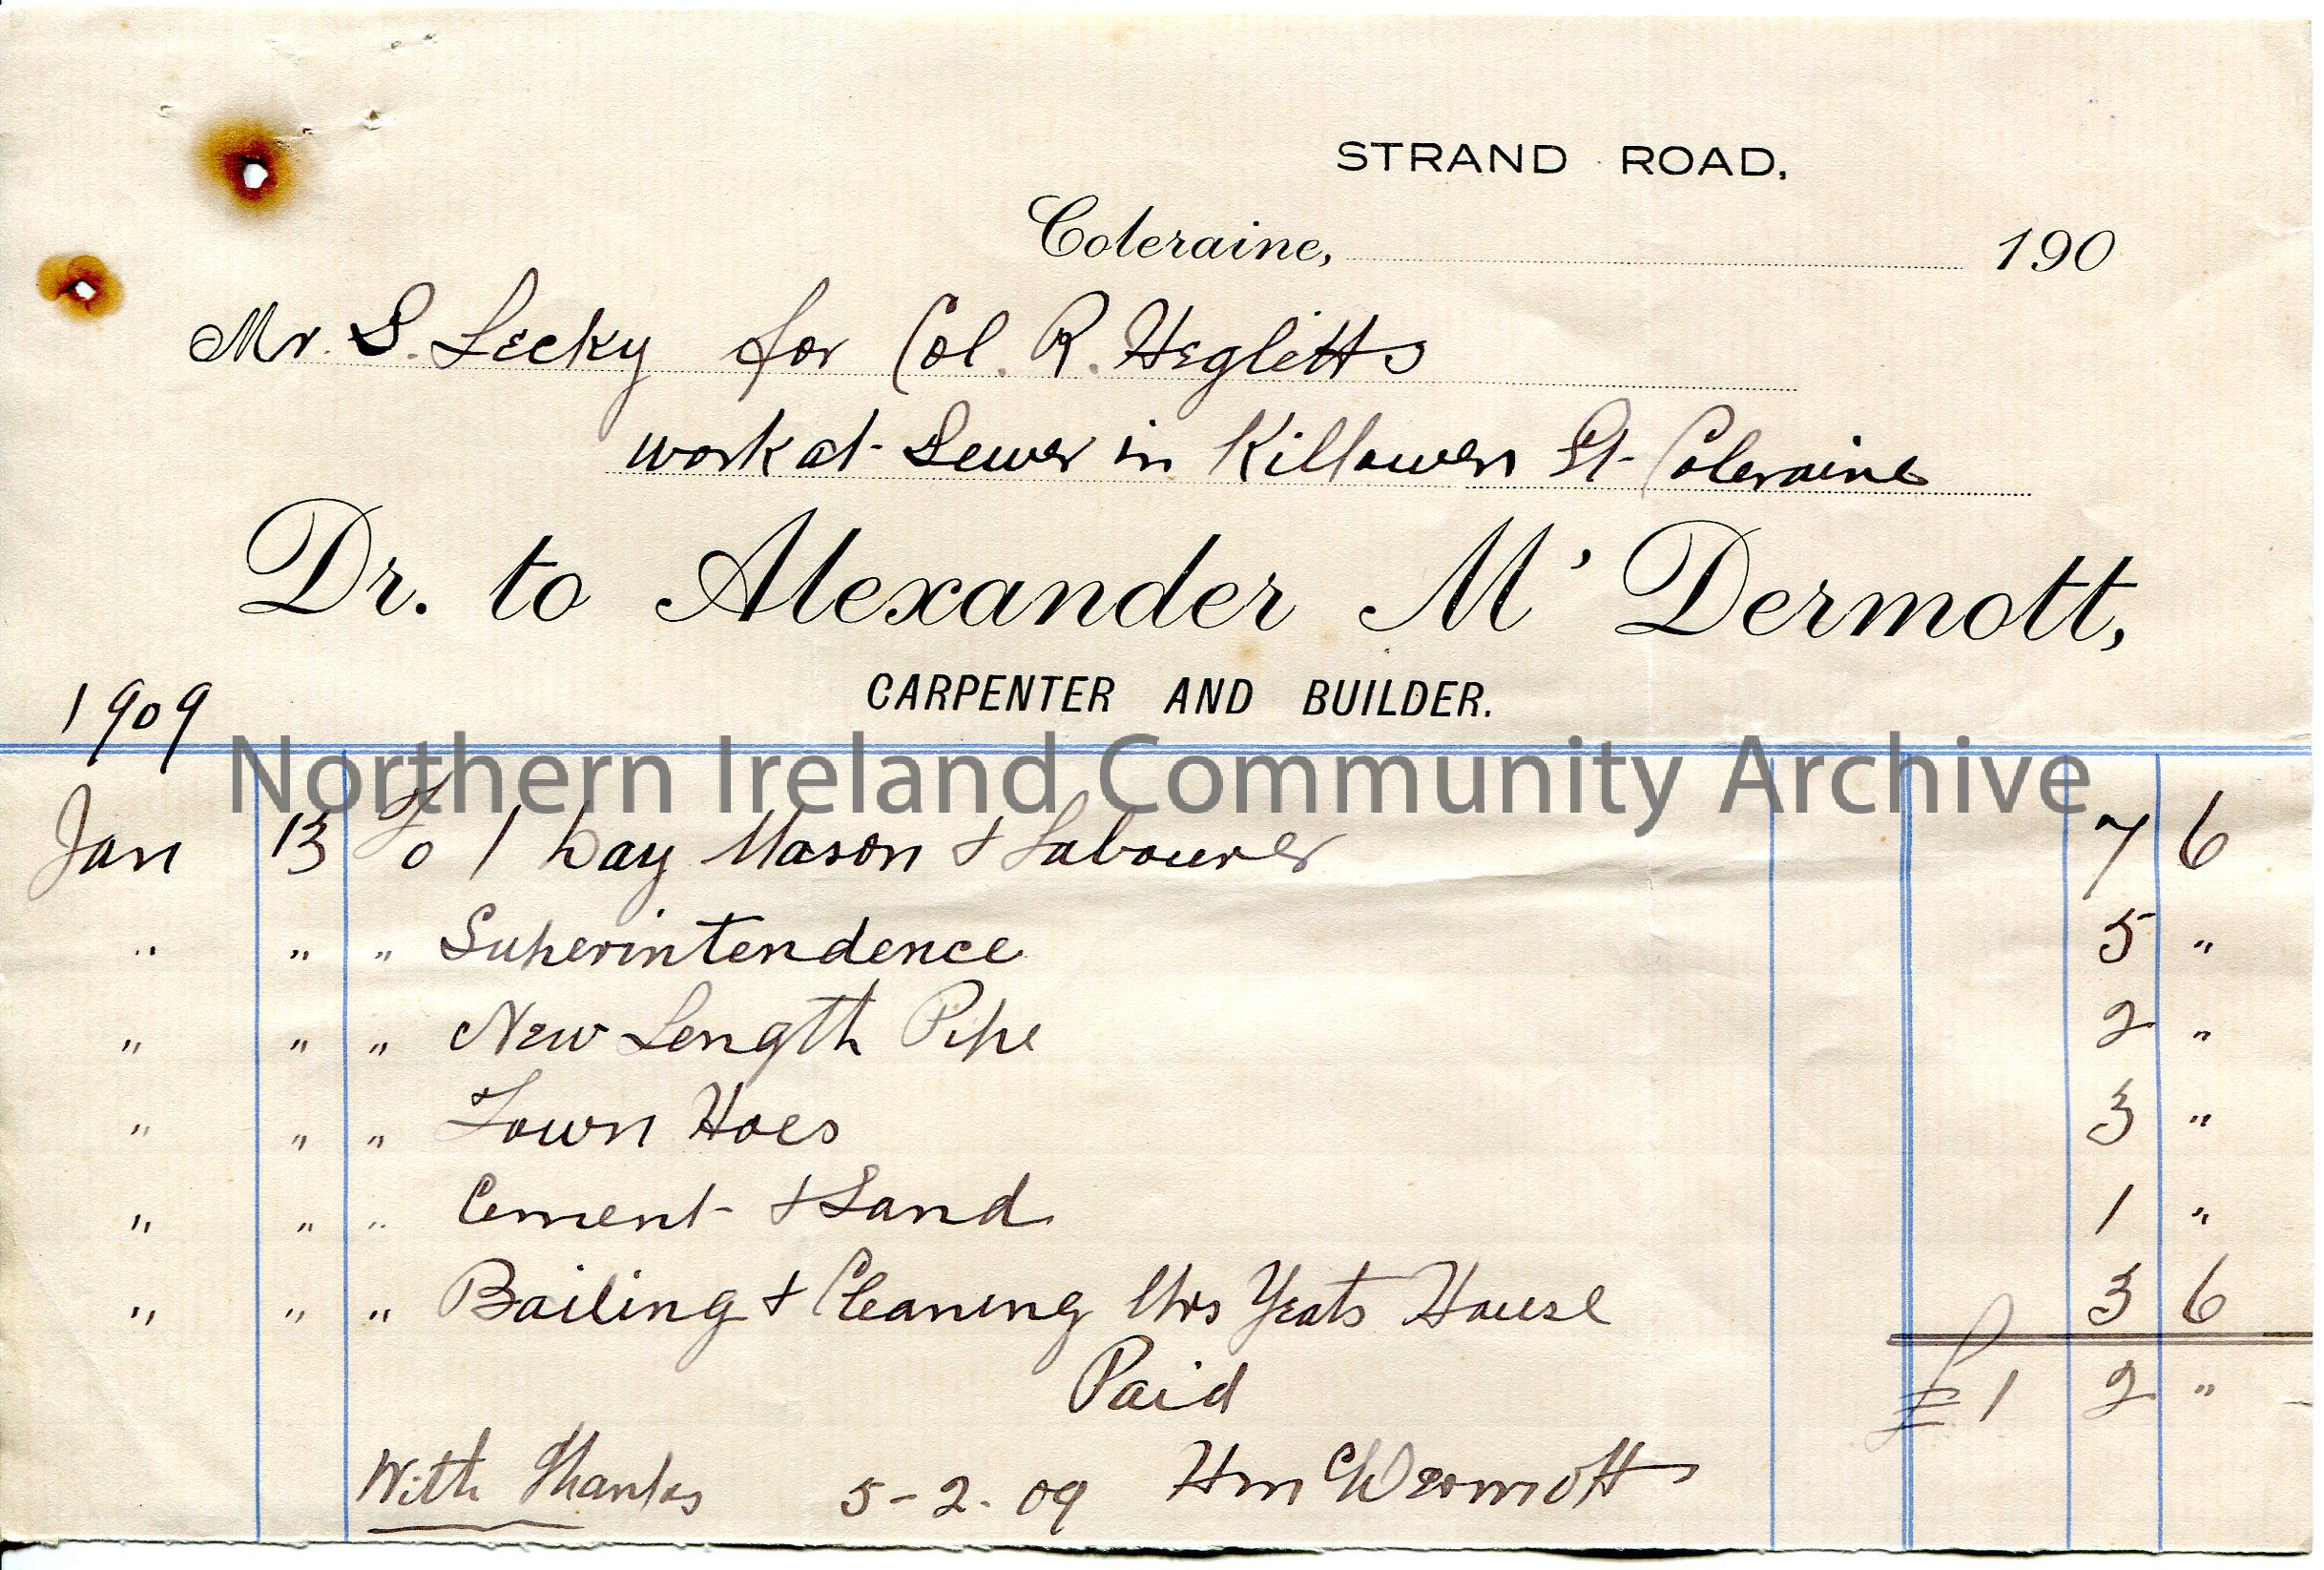 Handwritten receipt for work and materials completed in January, 1909 by Alexander M’Dermott, Carpenter and Builder, Strand Road, Coleraine. Invoiced …